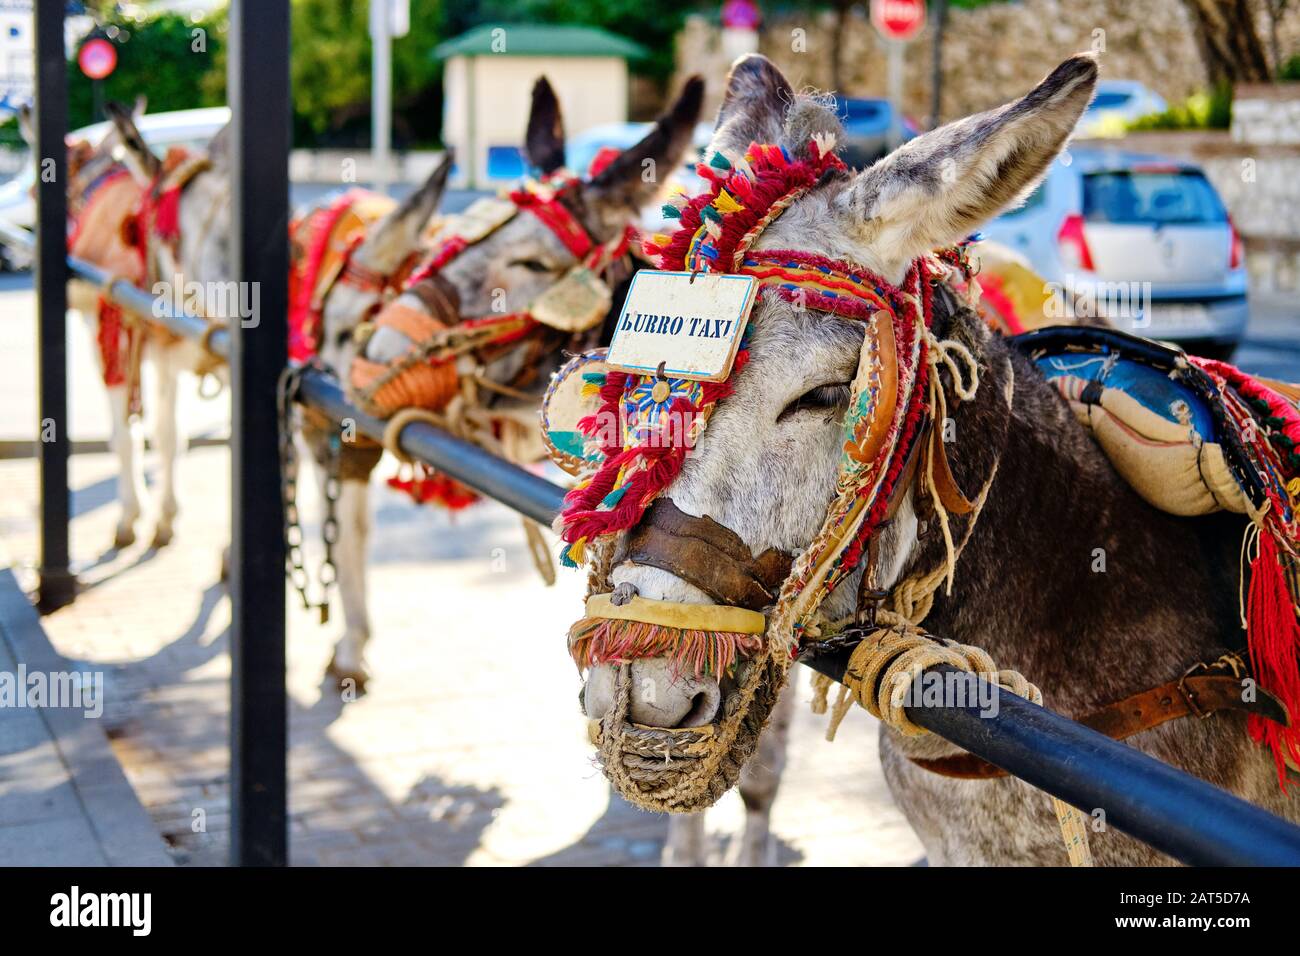 Donkey taxi landmark in Mijas village. Lot of donkey taxis waiting for tourists to come and ride them through the village. Costa del Sol, Spain Stock Photo